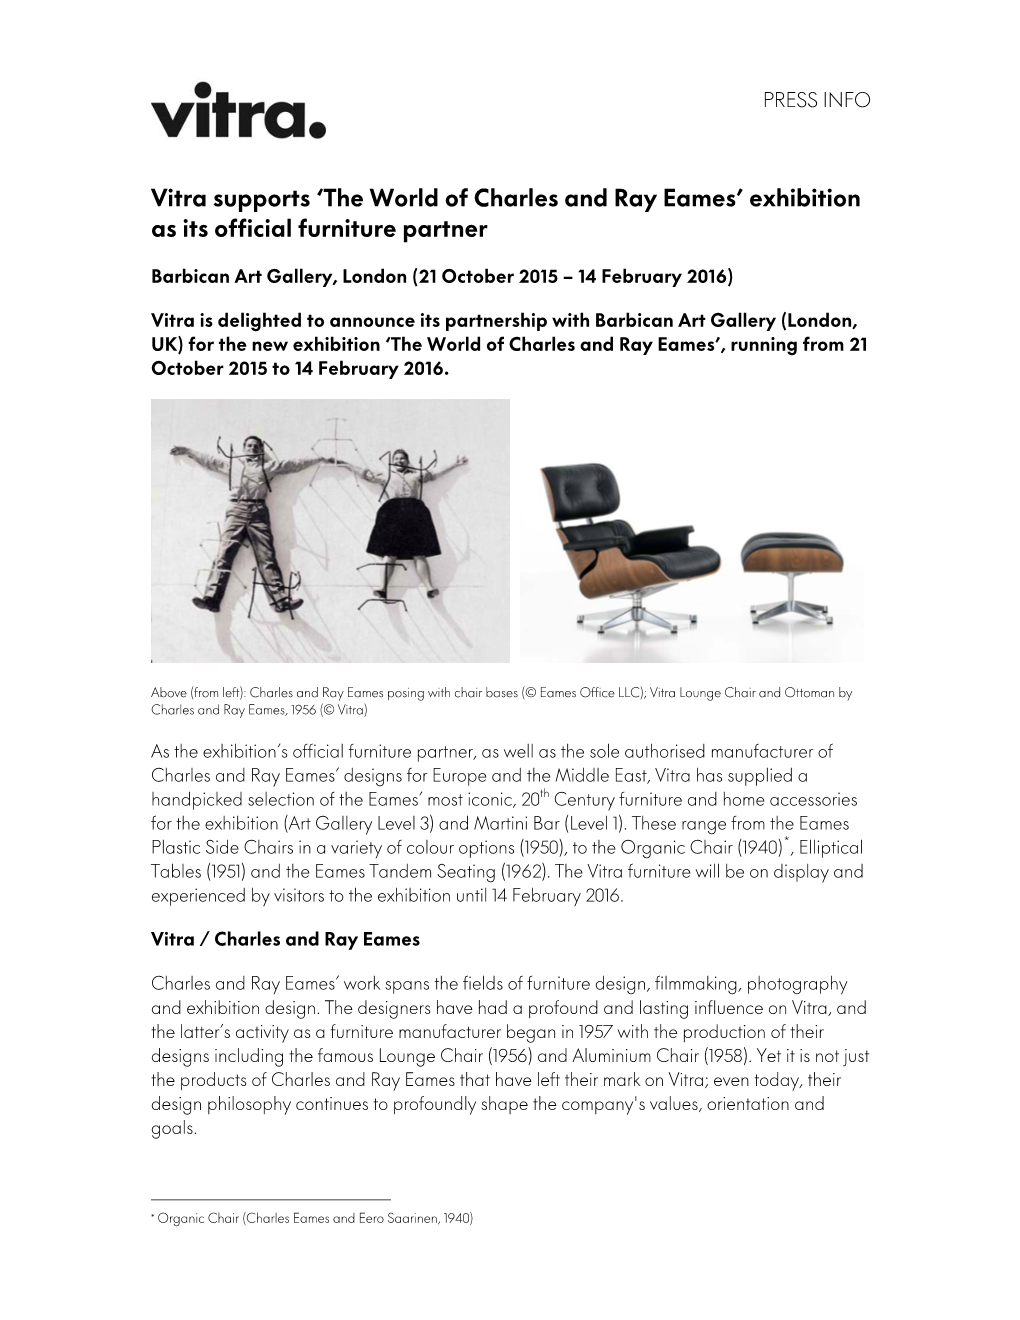 Vitra Supports 'The World of Charles and Ray Eames'